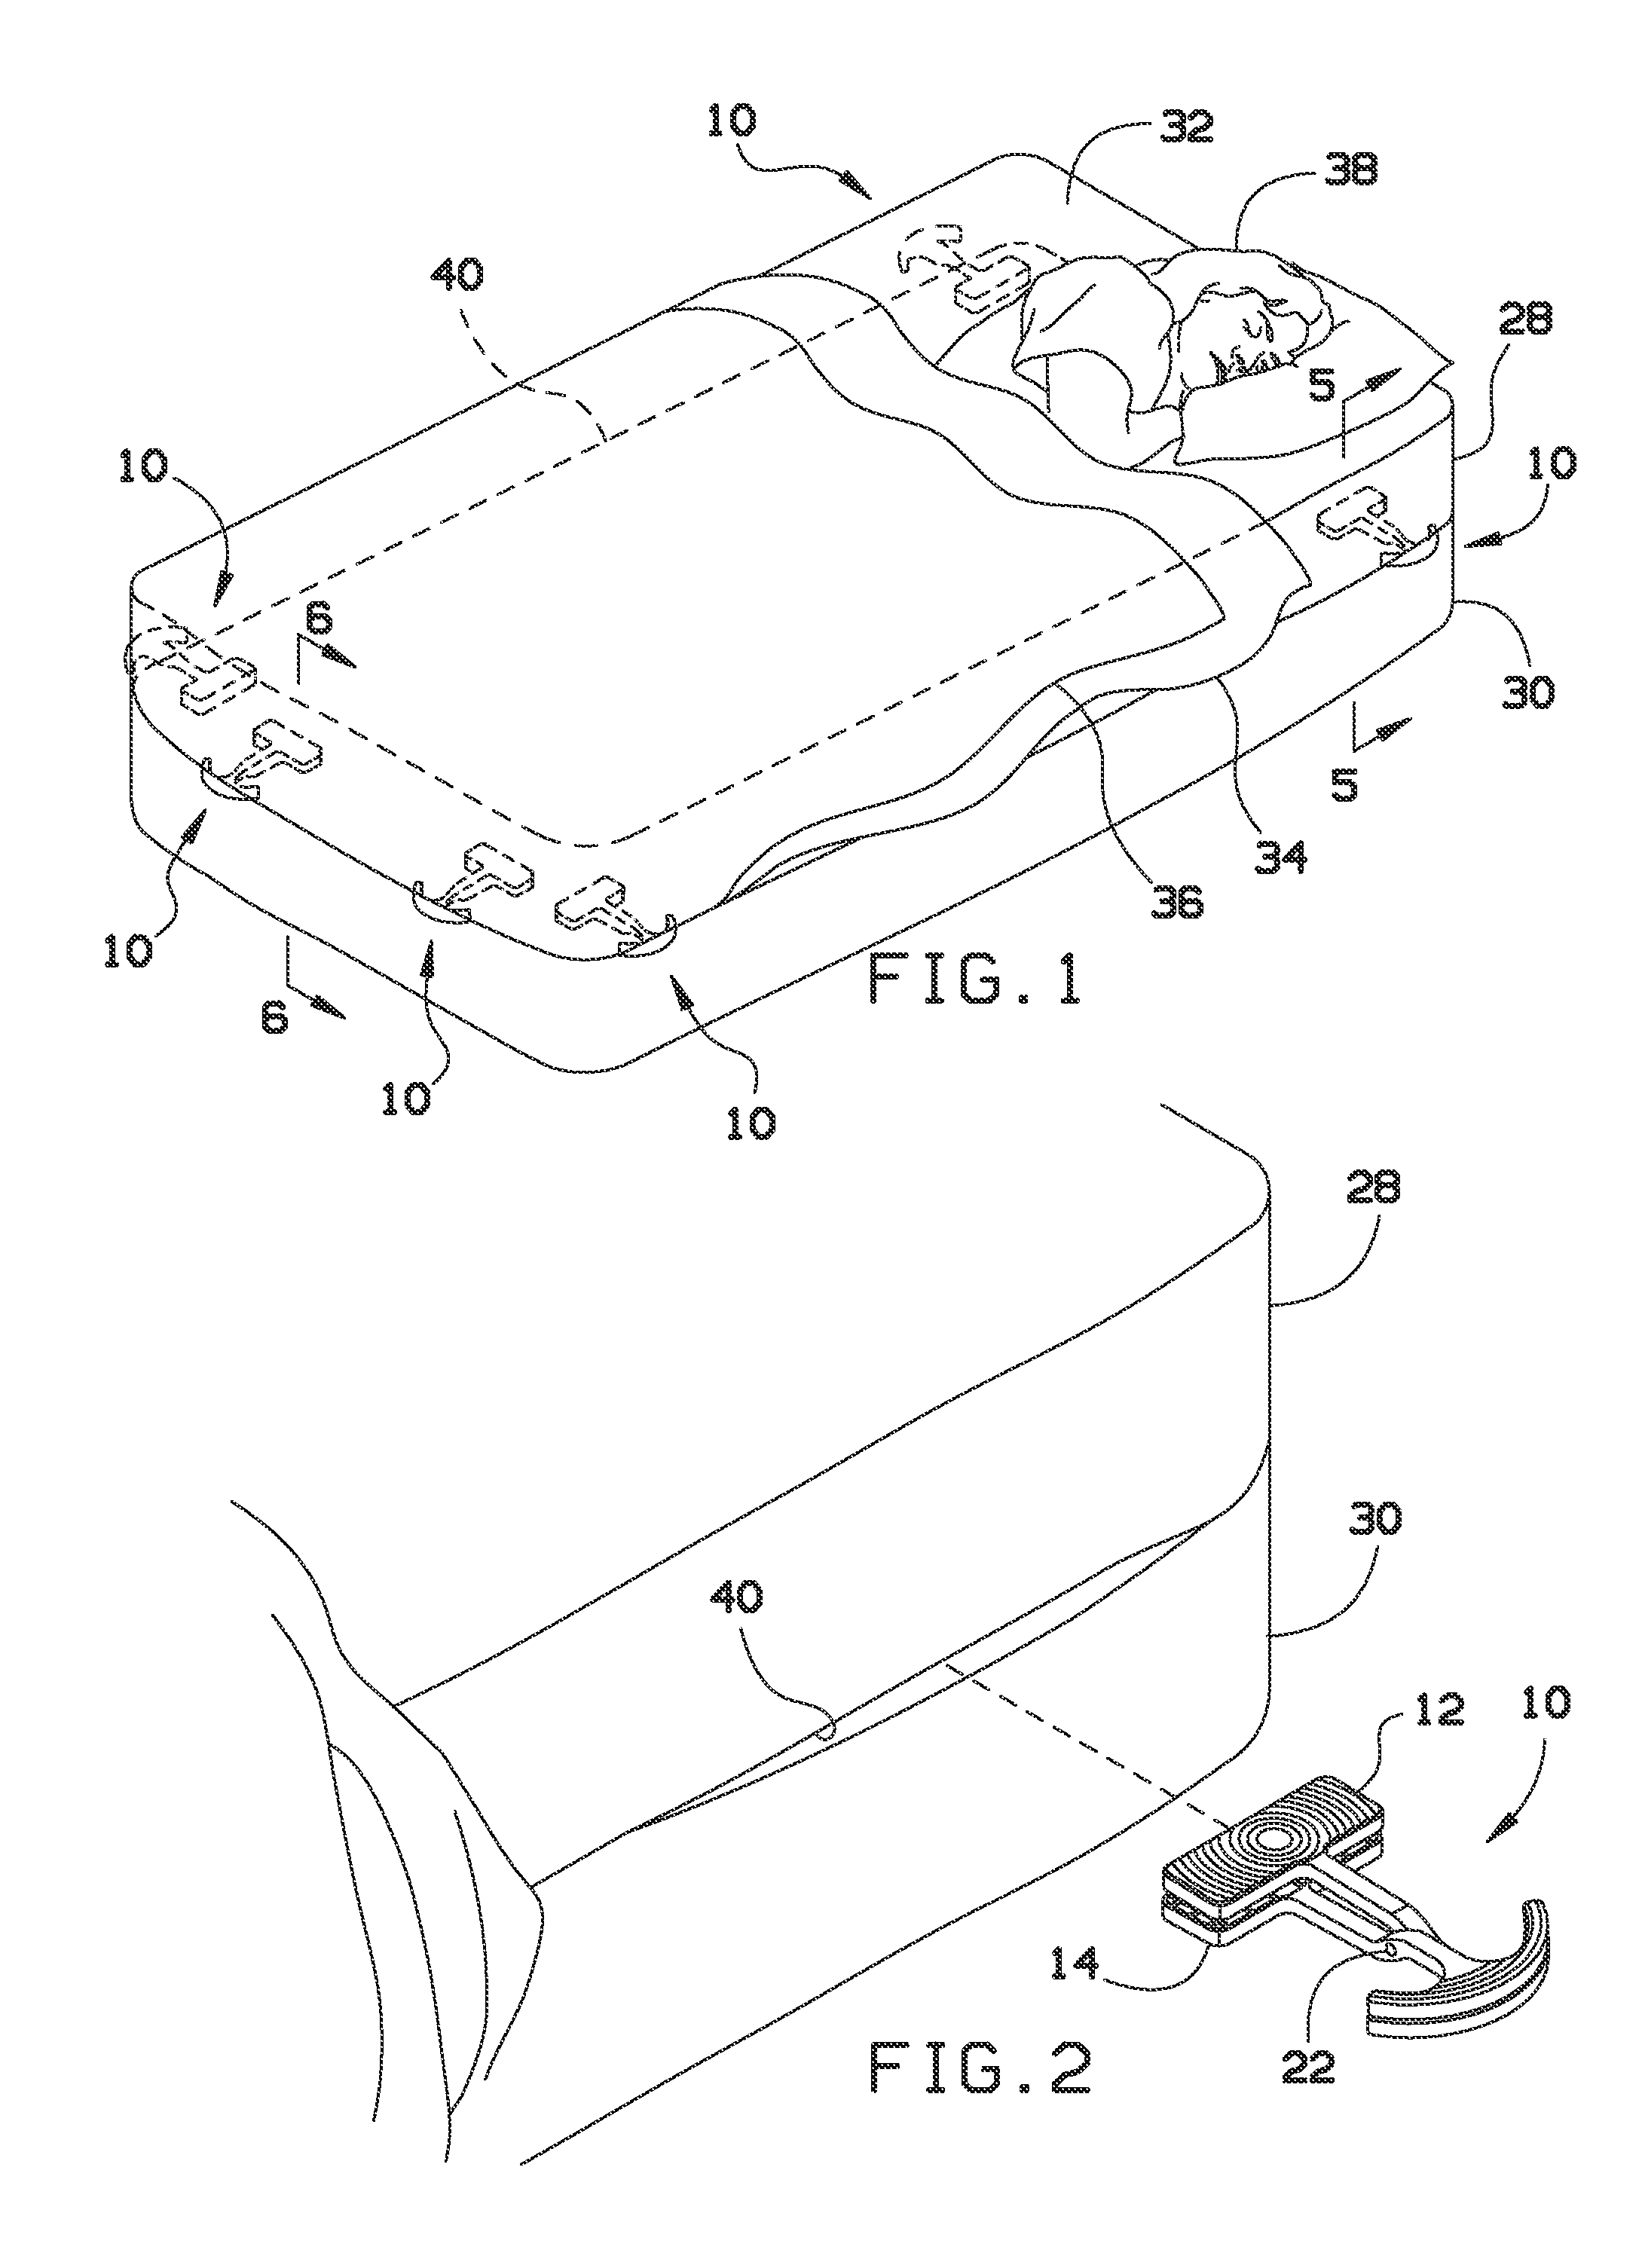 Bed sheet anchoring system